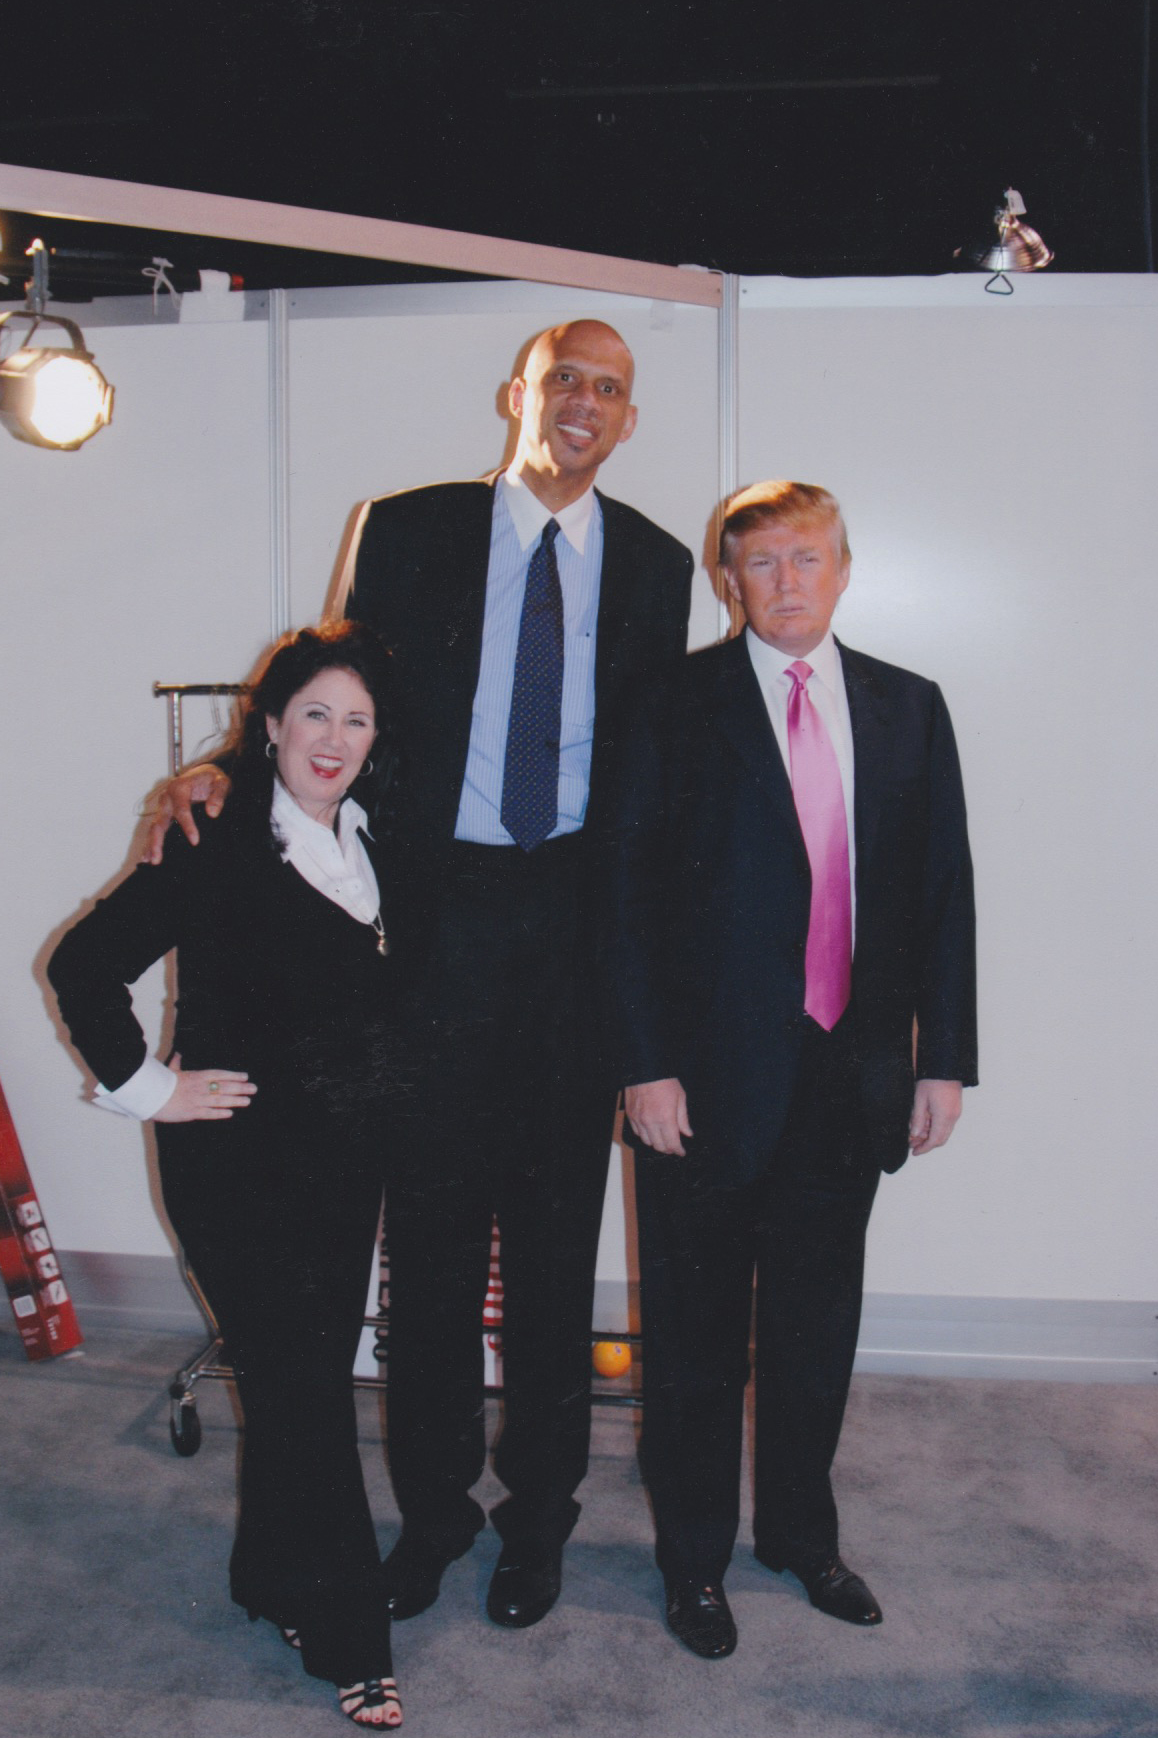 My manager Deborah Morales and I with Trump several years ago, before he forgot there are Muslim athletes (Provided by Kareem Abdul-Jabbar)